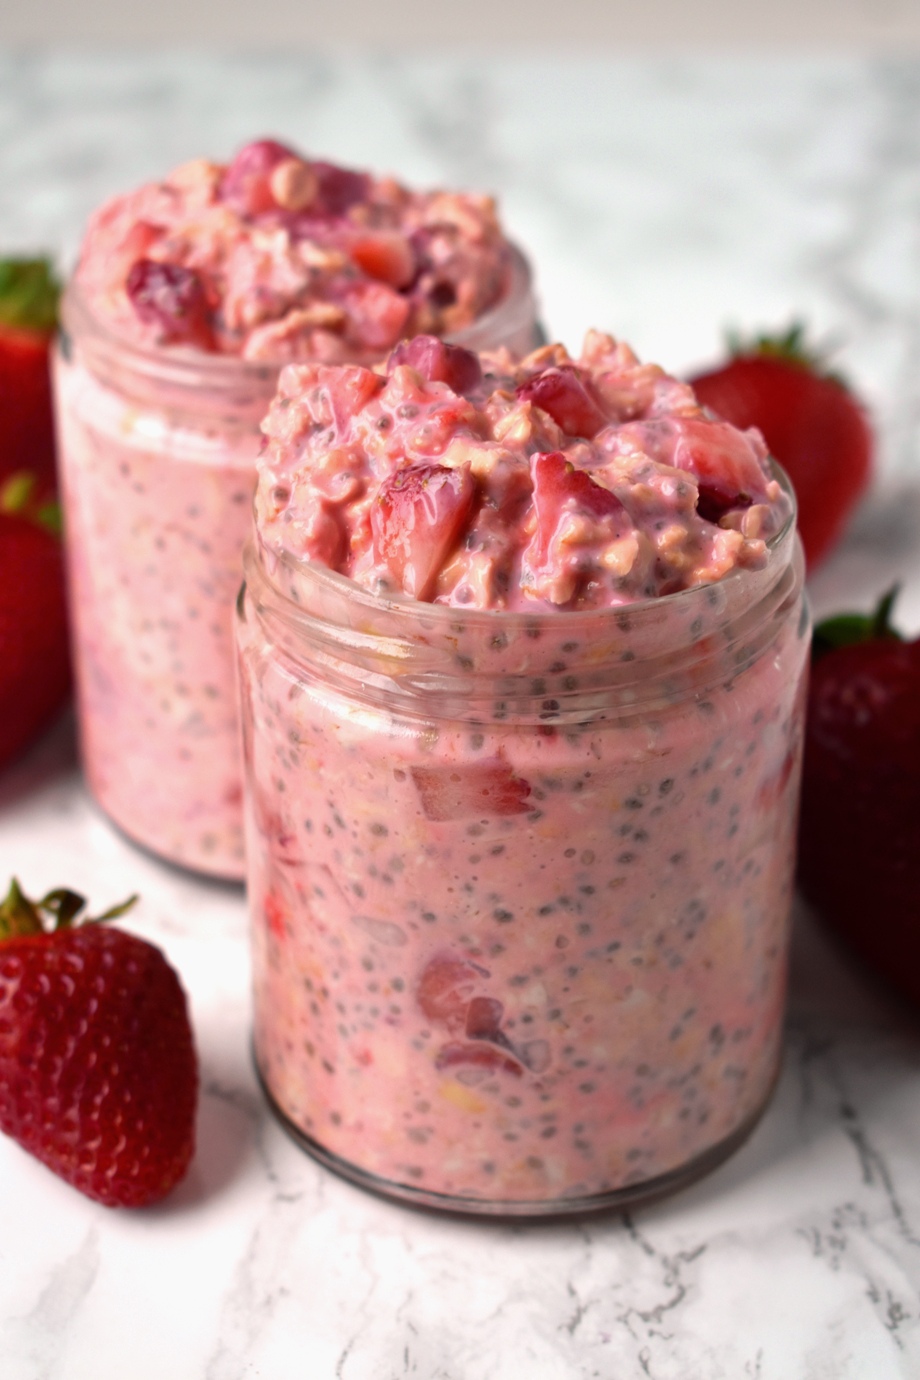 Strawberries and Cream Overnight Oats - Overnight Oat Recipes